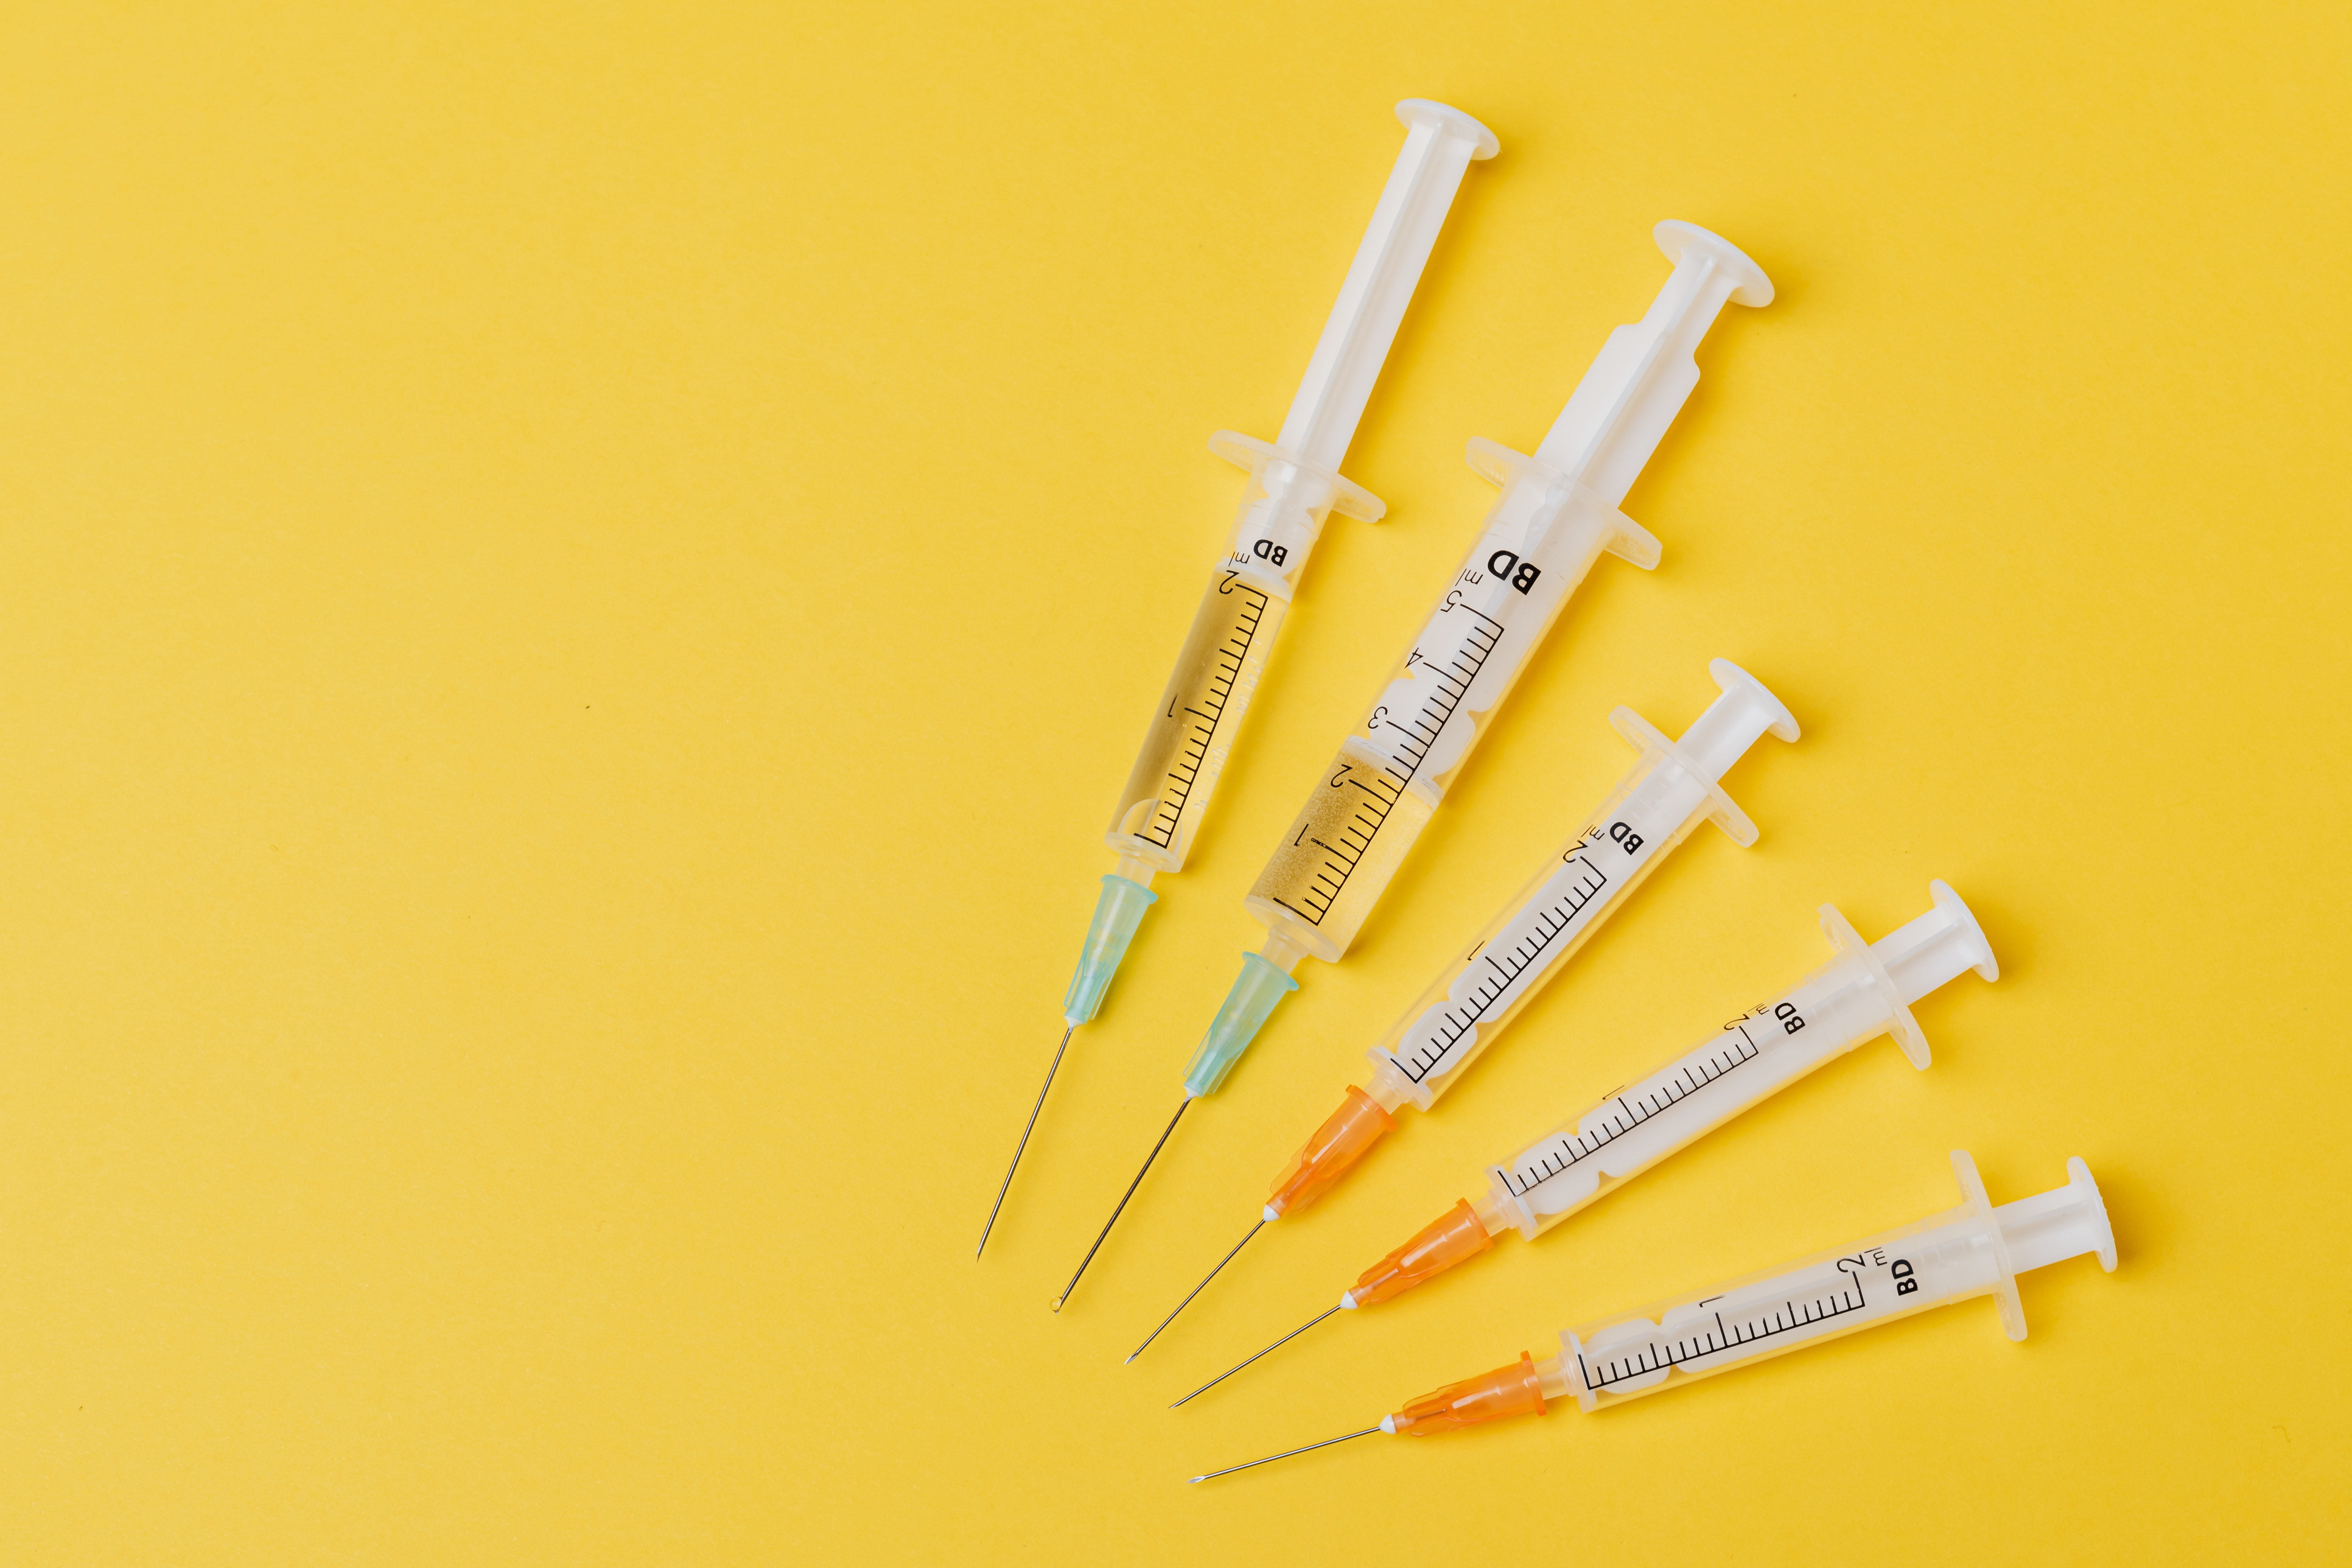 syringes that contain vaccines